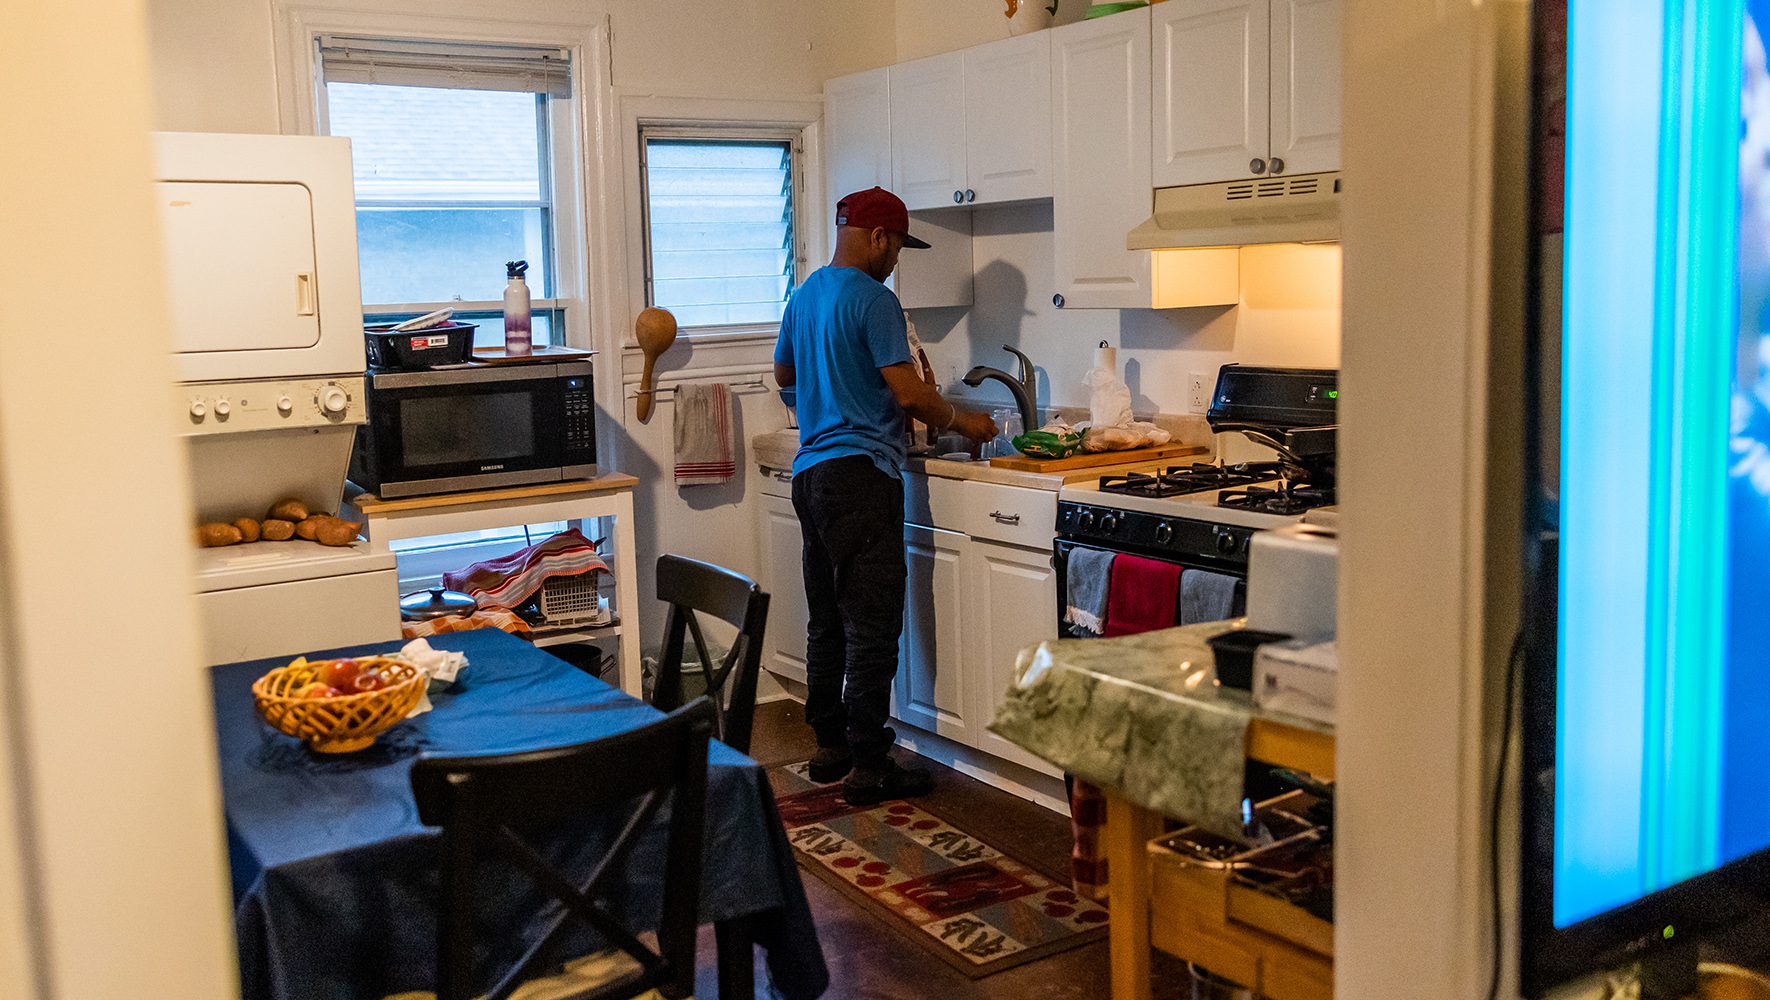 Robert cooks dinner at his home near Philadelphia on June 12, 2023. He enjoys cooking for himself and others; today, he prepares a meal of tilapia, mixed vegetables, and Katogo, a traditional Ugandan dish using green bananas. | 